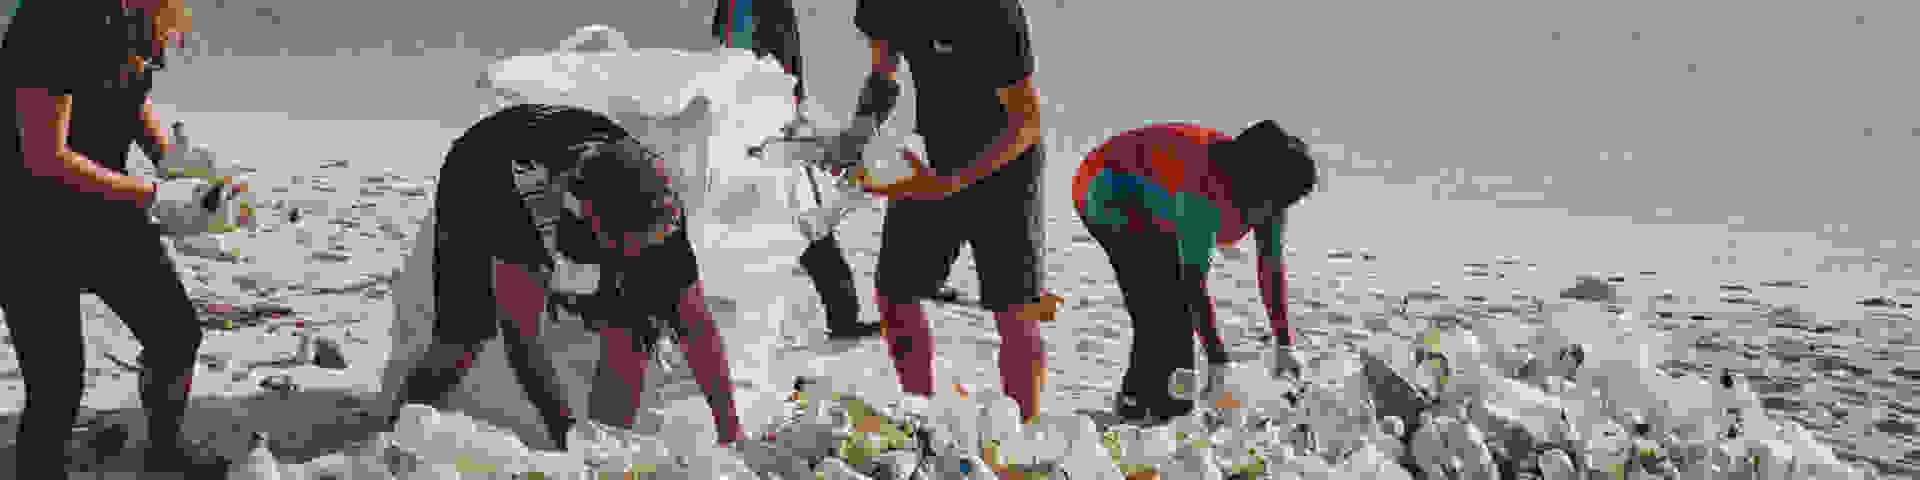 A group of people pickup up plastic waste on a beach under the hot sun